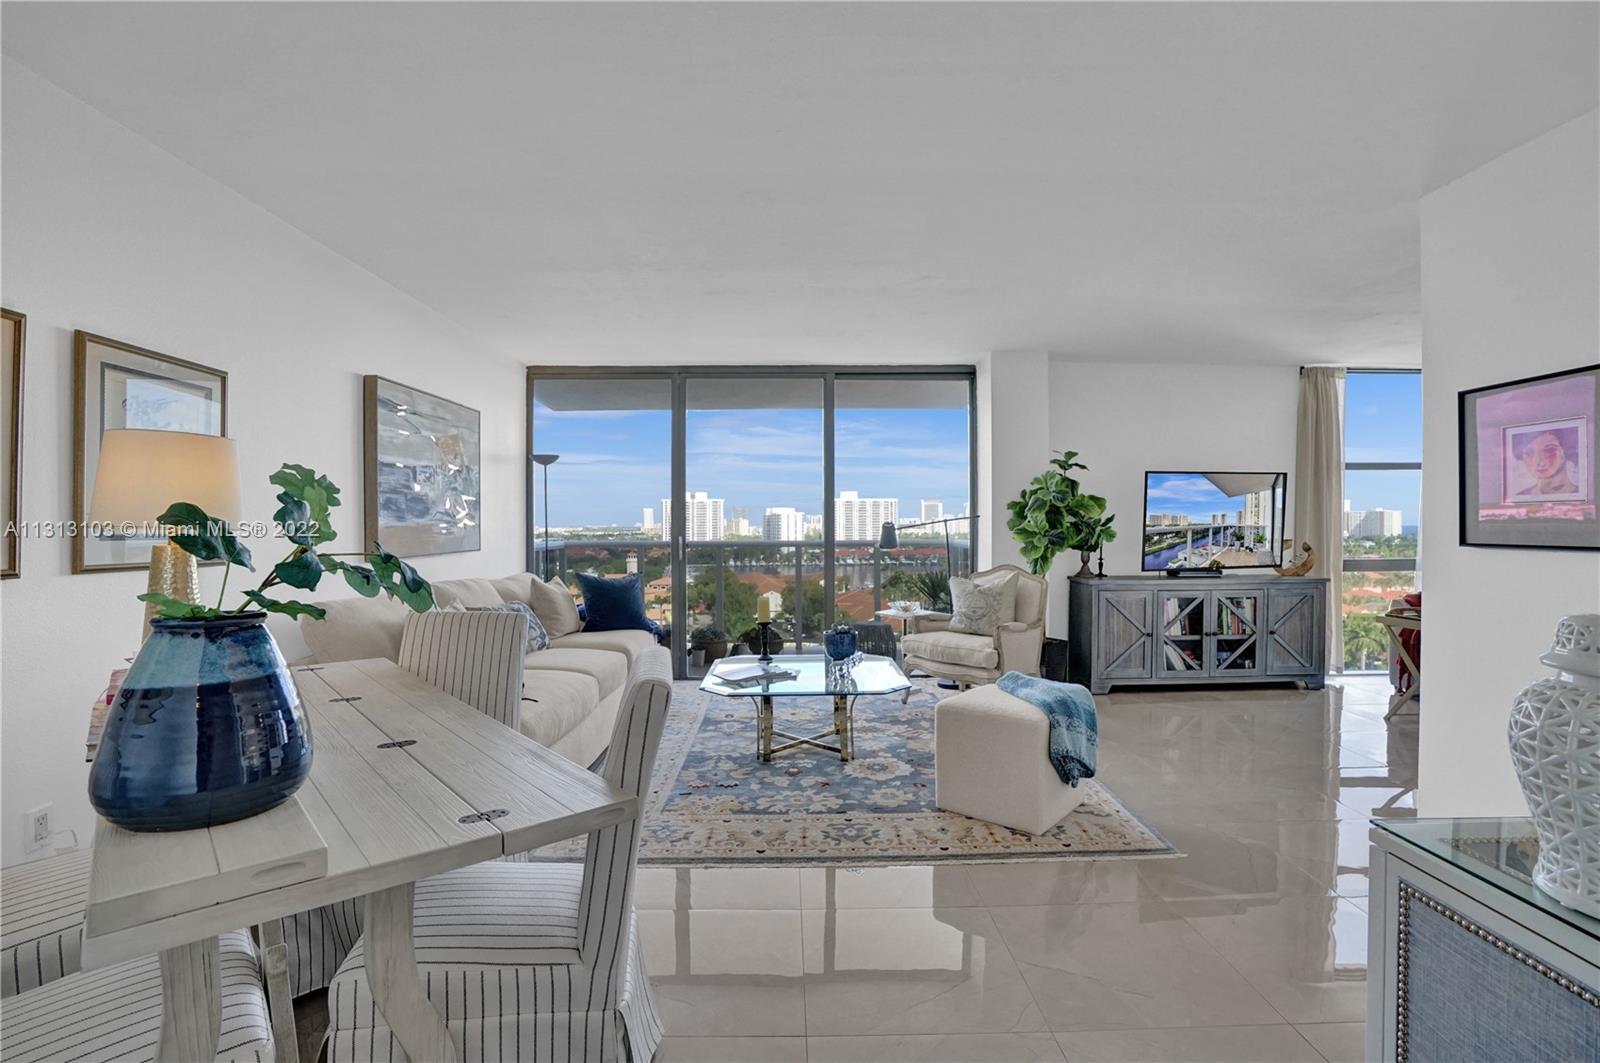 Back on the market at a new price. Amazing views from this beautifully remodeled 1 bed, 1.5 bath con